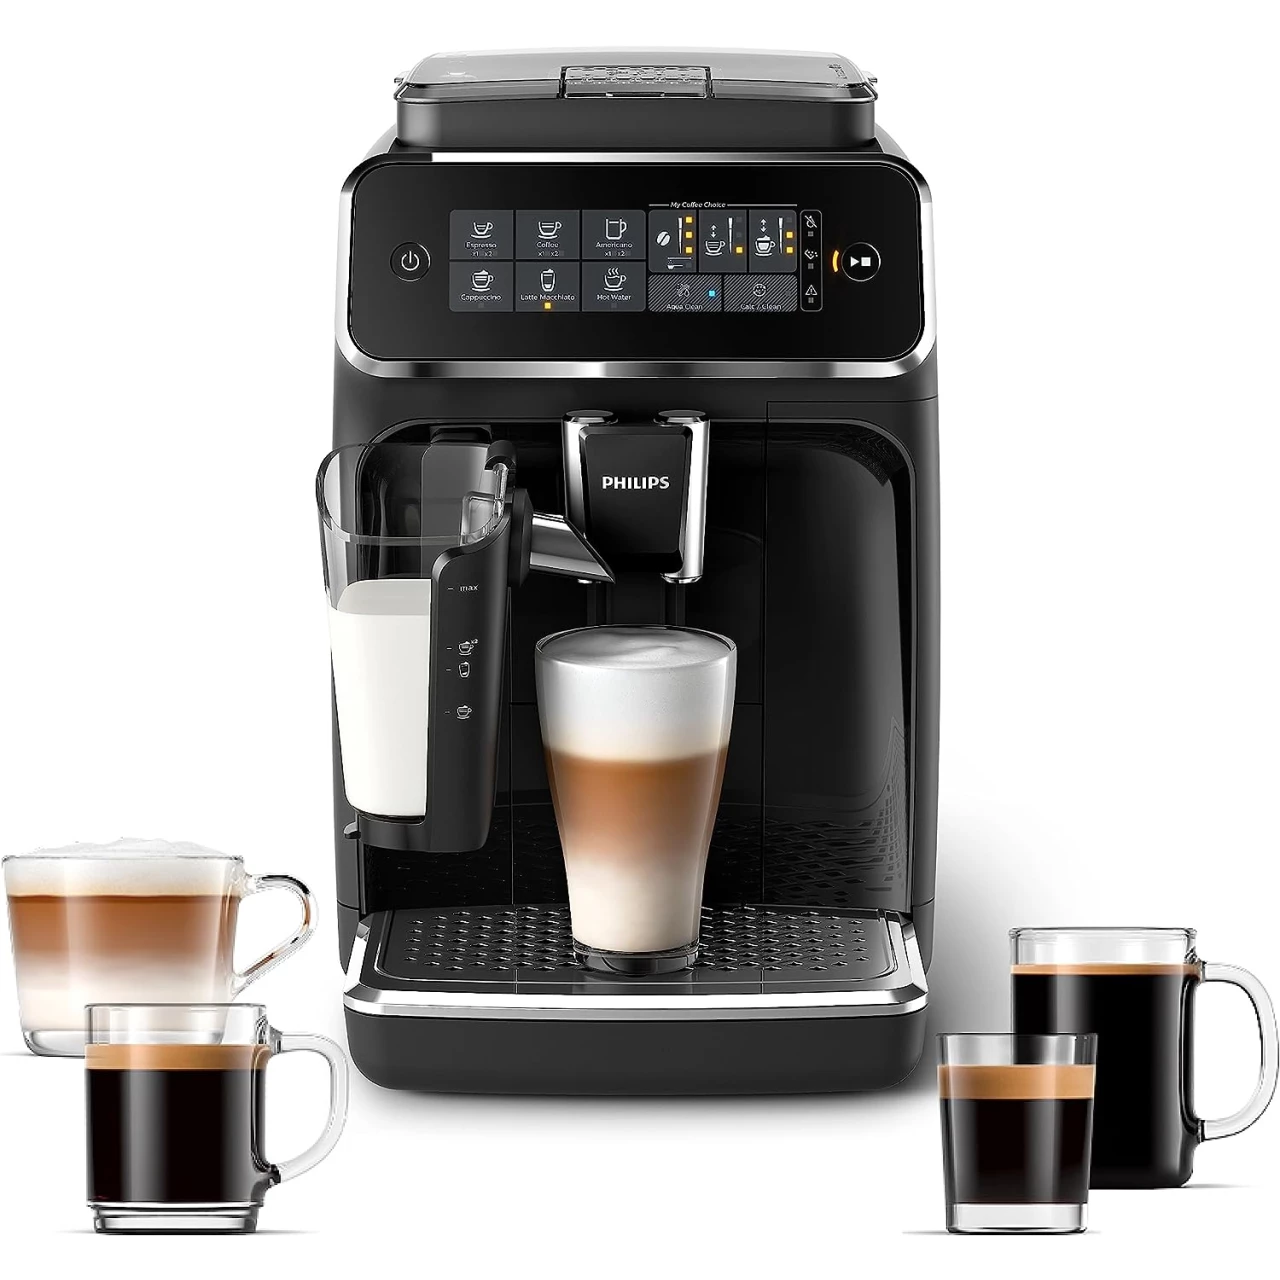 PHILIPS 3200 Series Fully Automatic Espresso Machine - LatteGo Milk Frother, 5 Coffee Varieties, Intuitive Touch Display, Black, (EP3241/54)